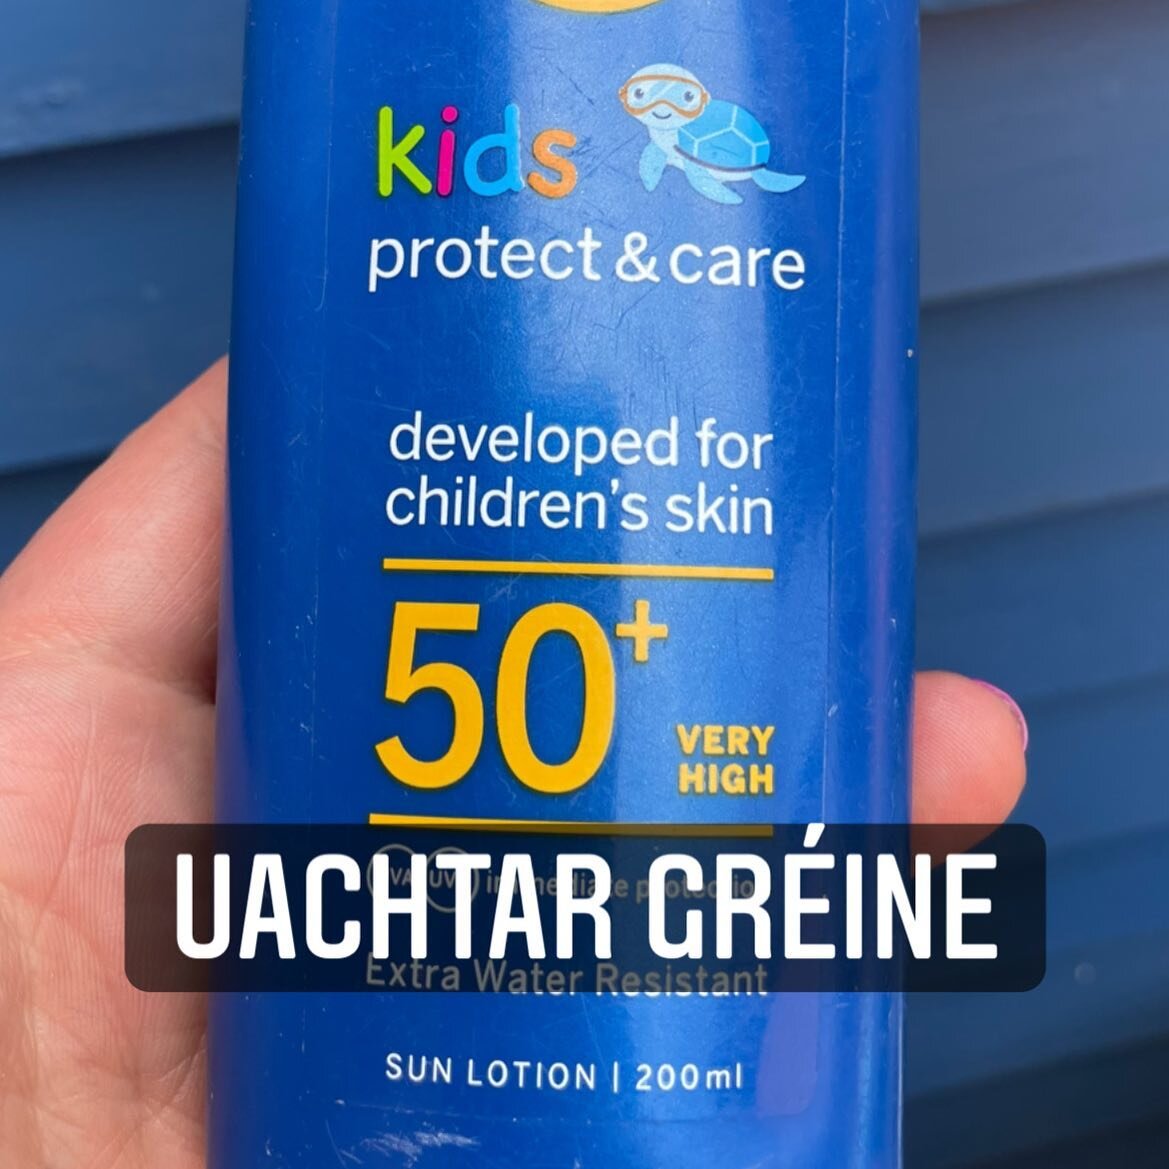 Focal an lae, word of the day uachtar gr&eacute;ine = sun cream. We hope you are enjoying this good weather but please don&rsquo;t forget your sun protection, hats, cover ups and to enjoy the shade too!